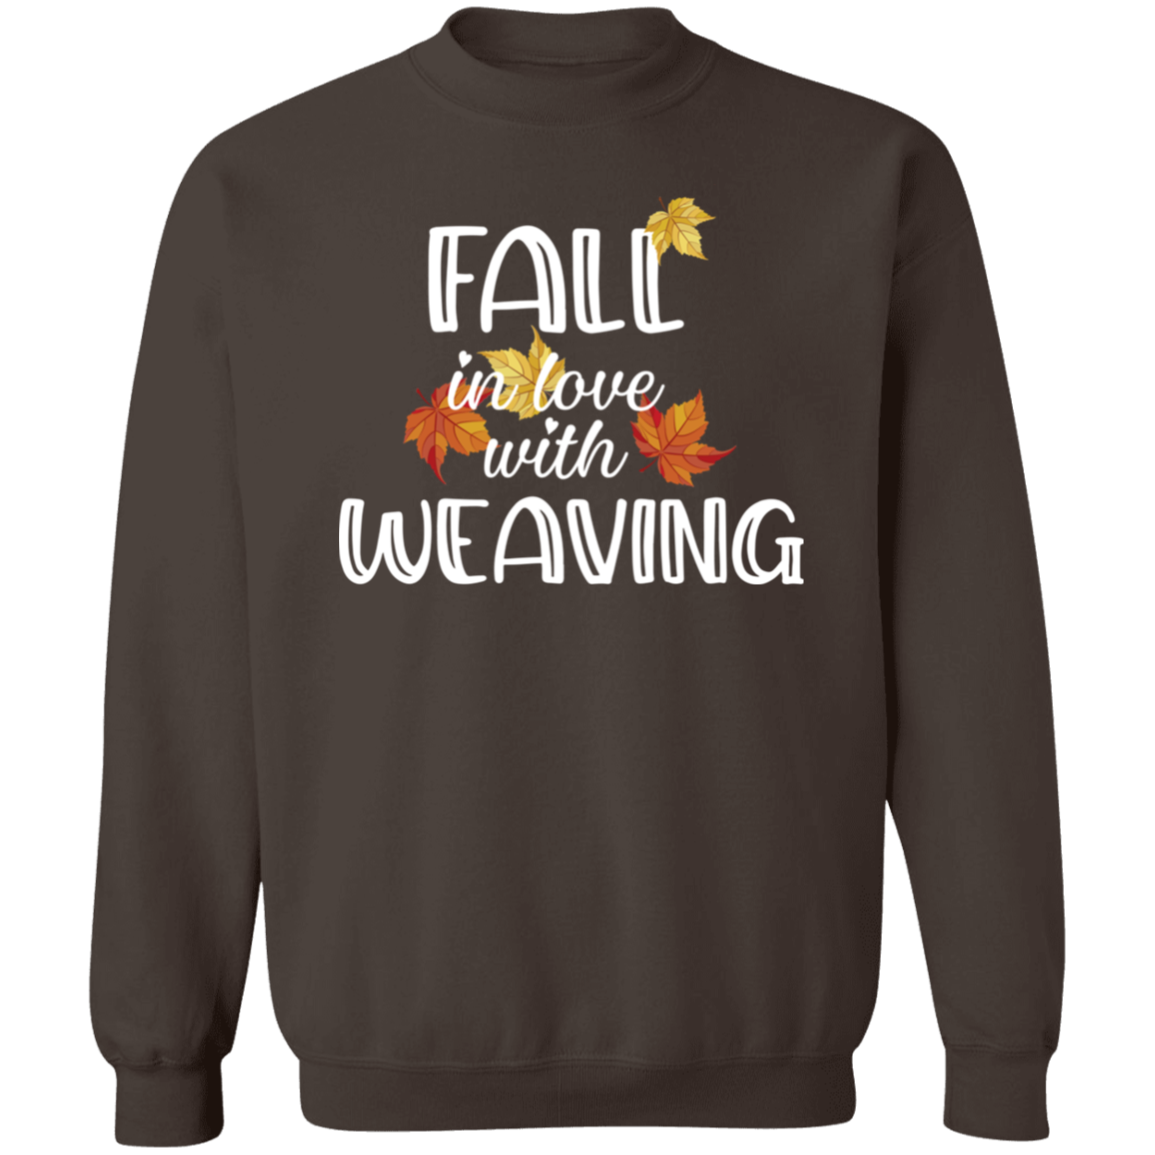 Fall in Love with Weaving Crewneck Pullover Sweatshirt